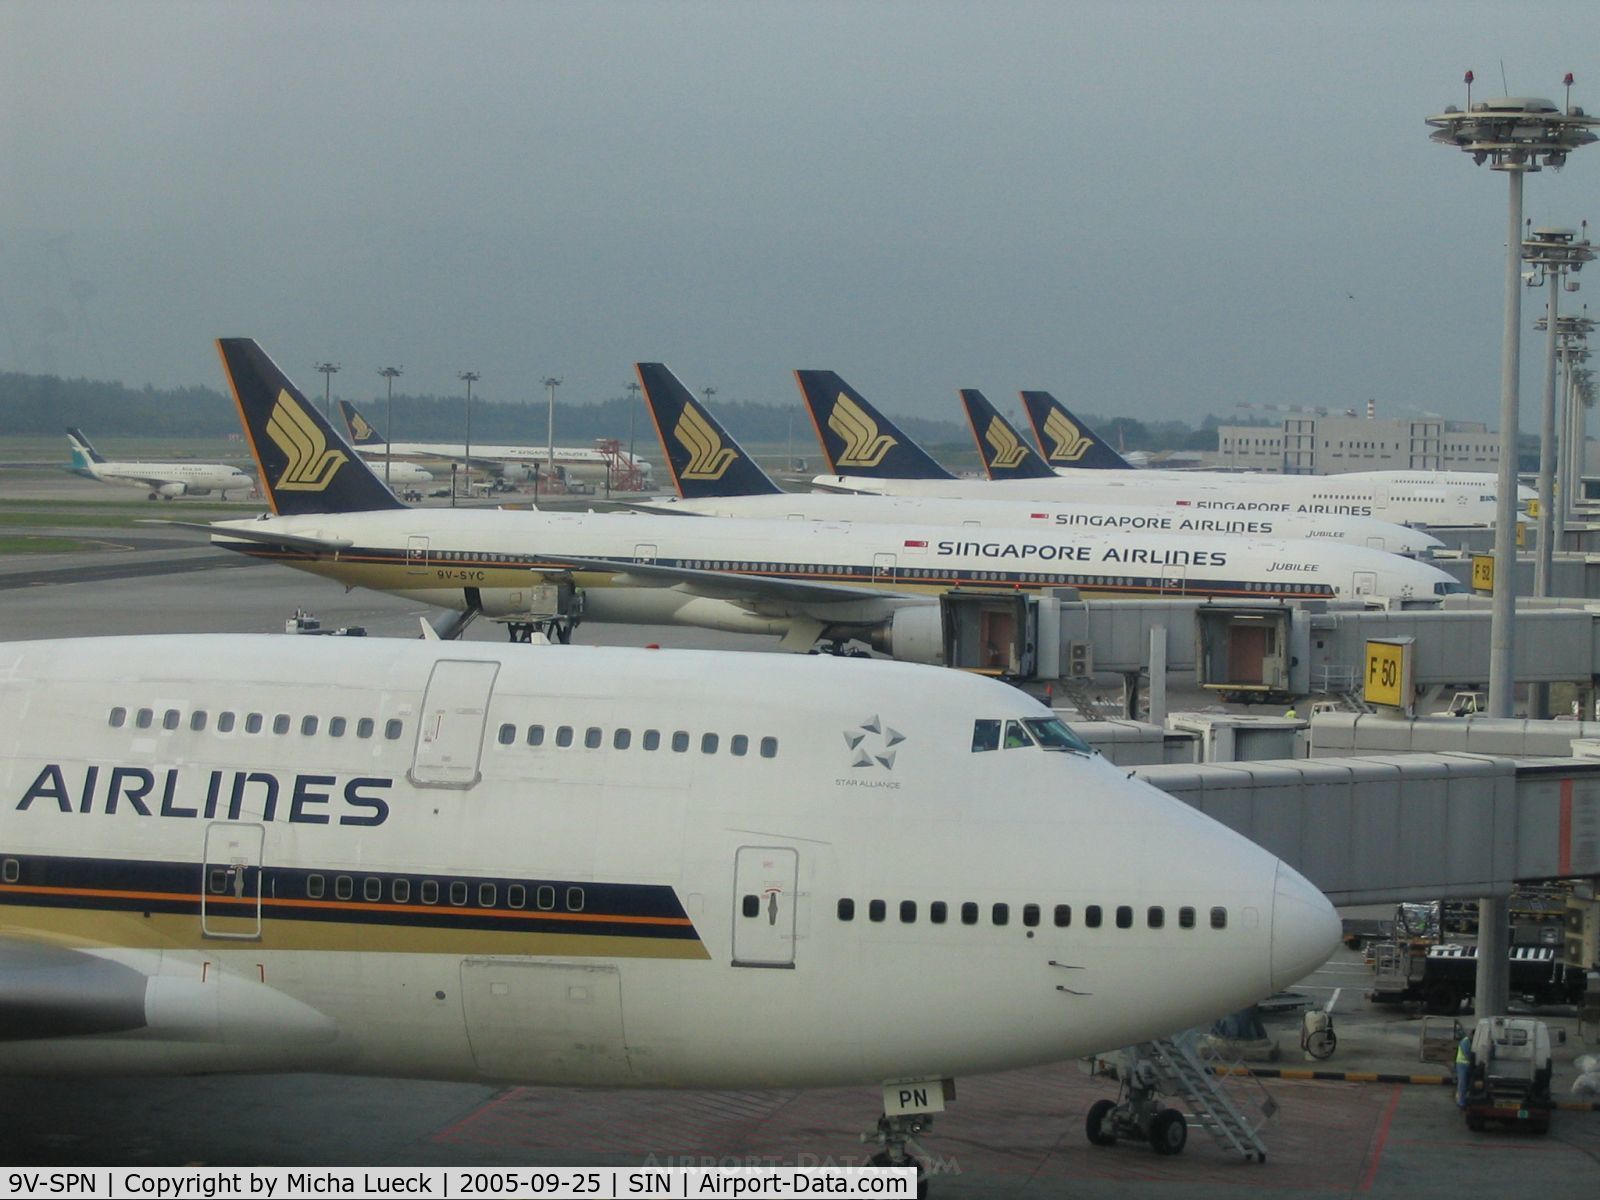 9V-SPN, 2001 Boeing 747-412 C/N 28031, Impressive fleet of B747-400s and B777s of Singapore Airlines at Changi Airport